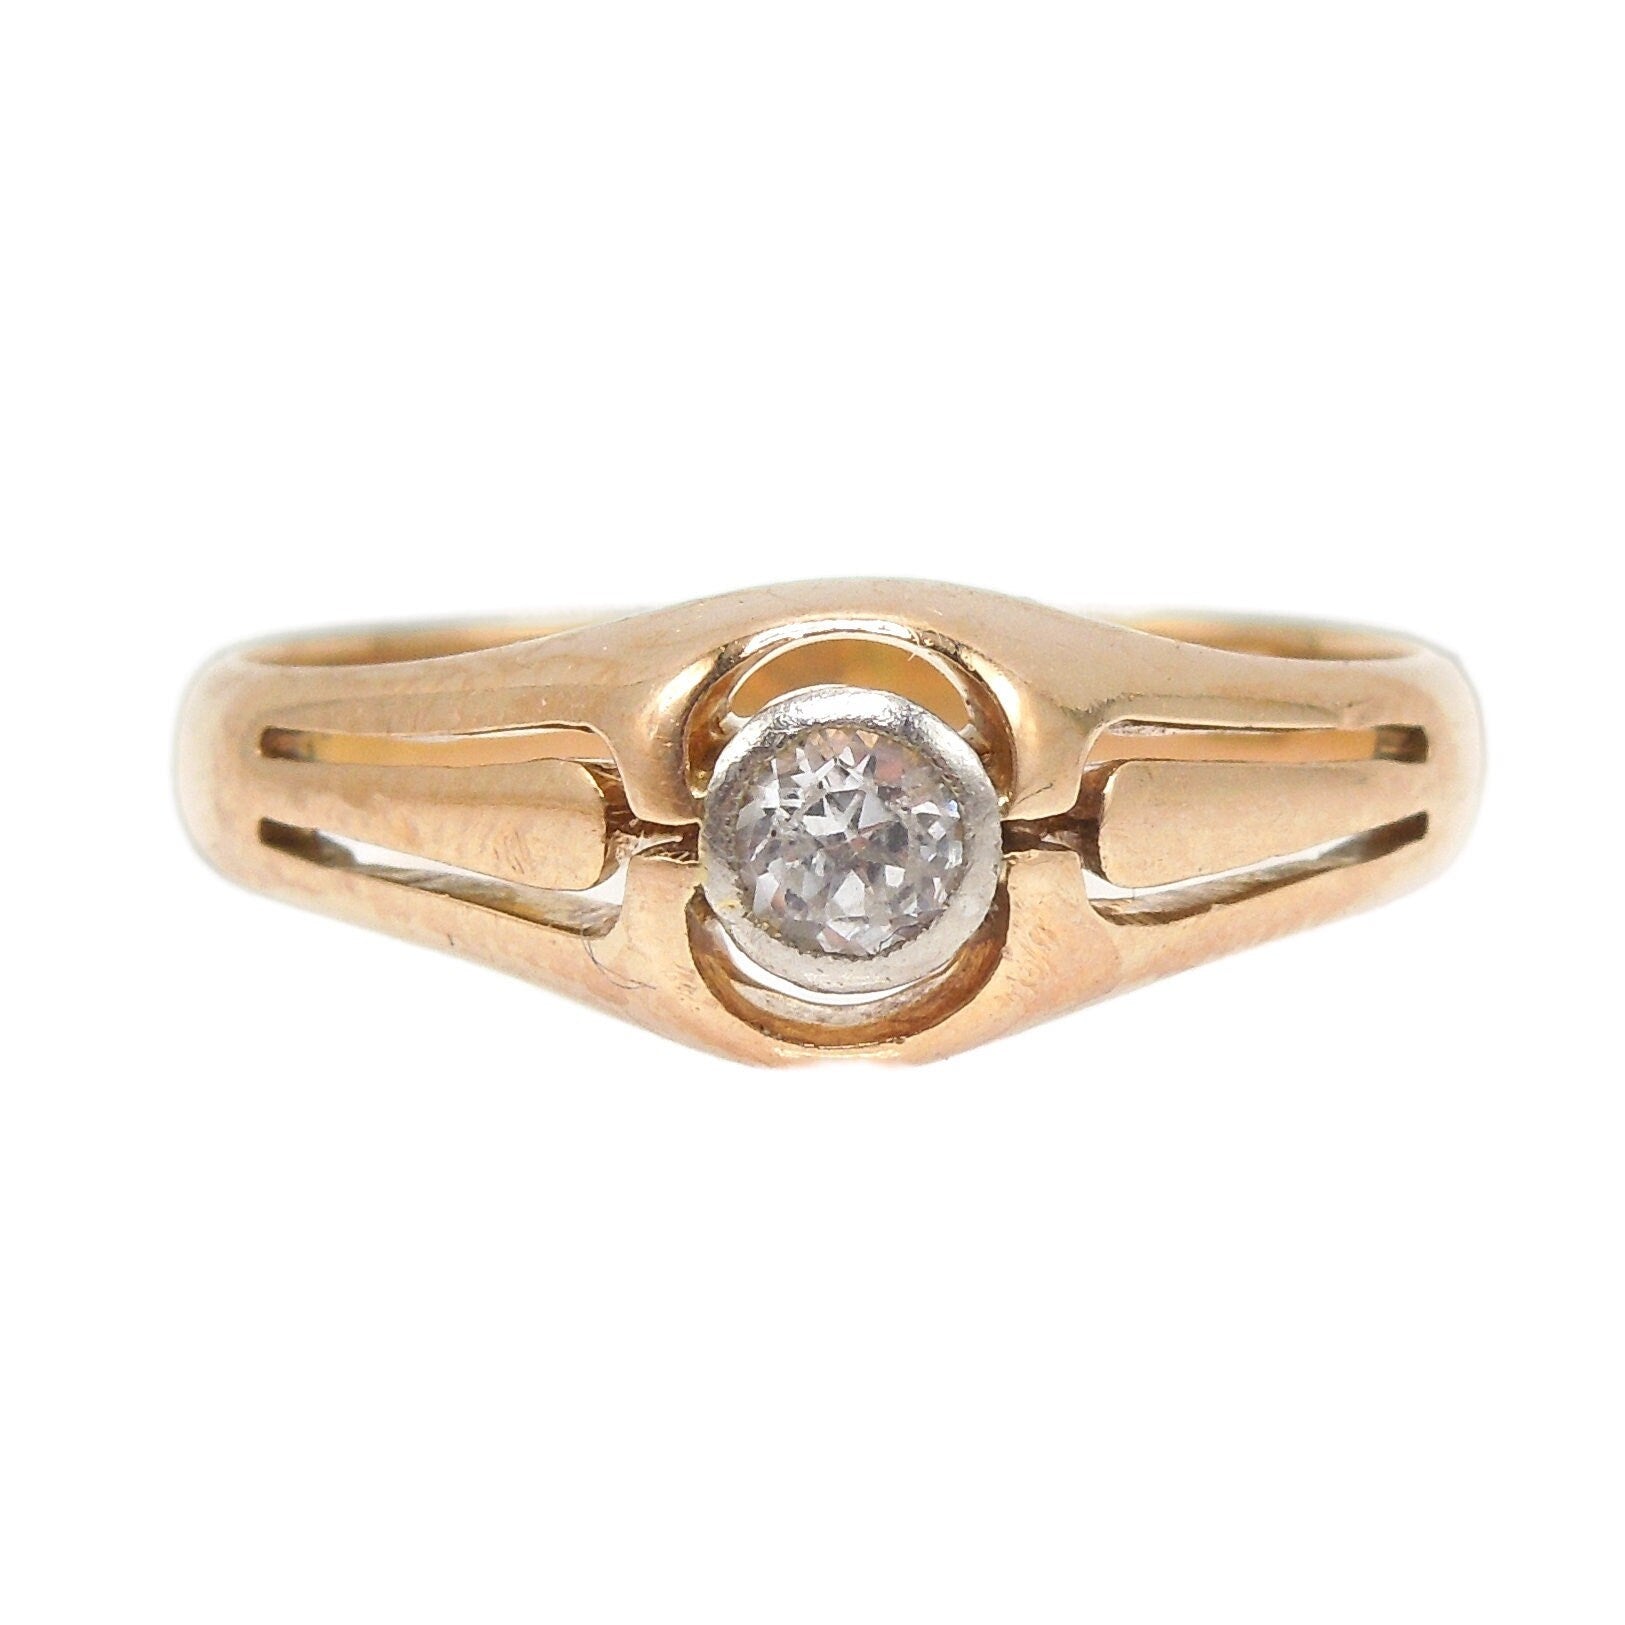 Midcentury Bezel Set 0.10ct Diamond in Bicolor Gold Setting with Cutouts